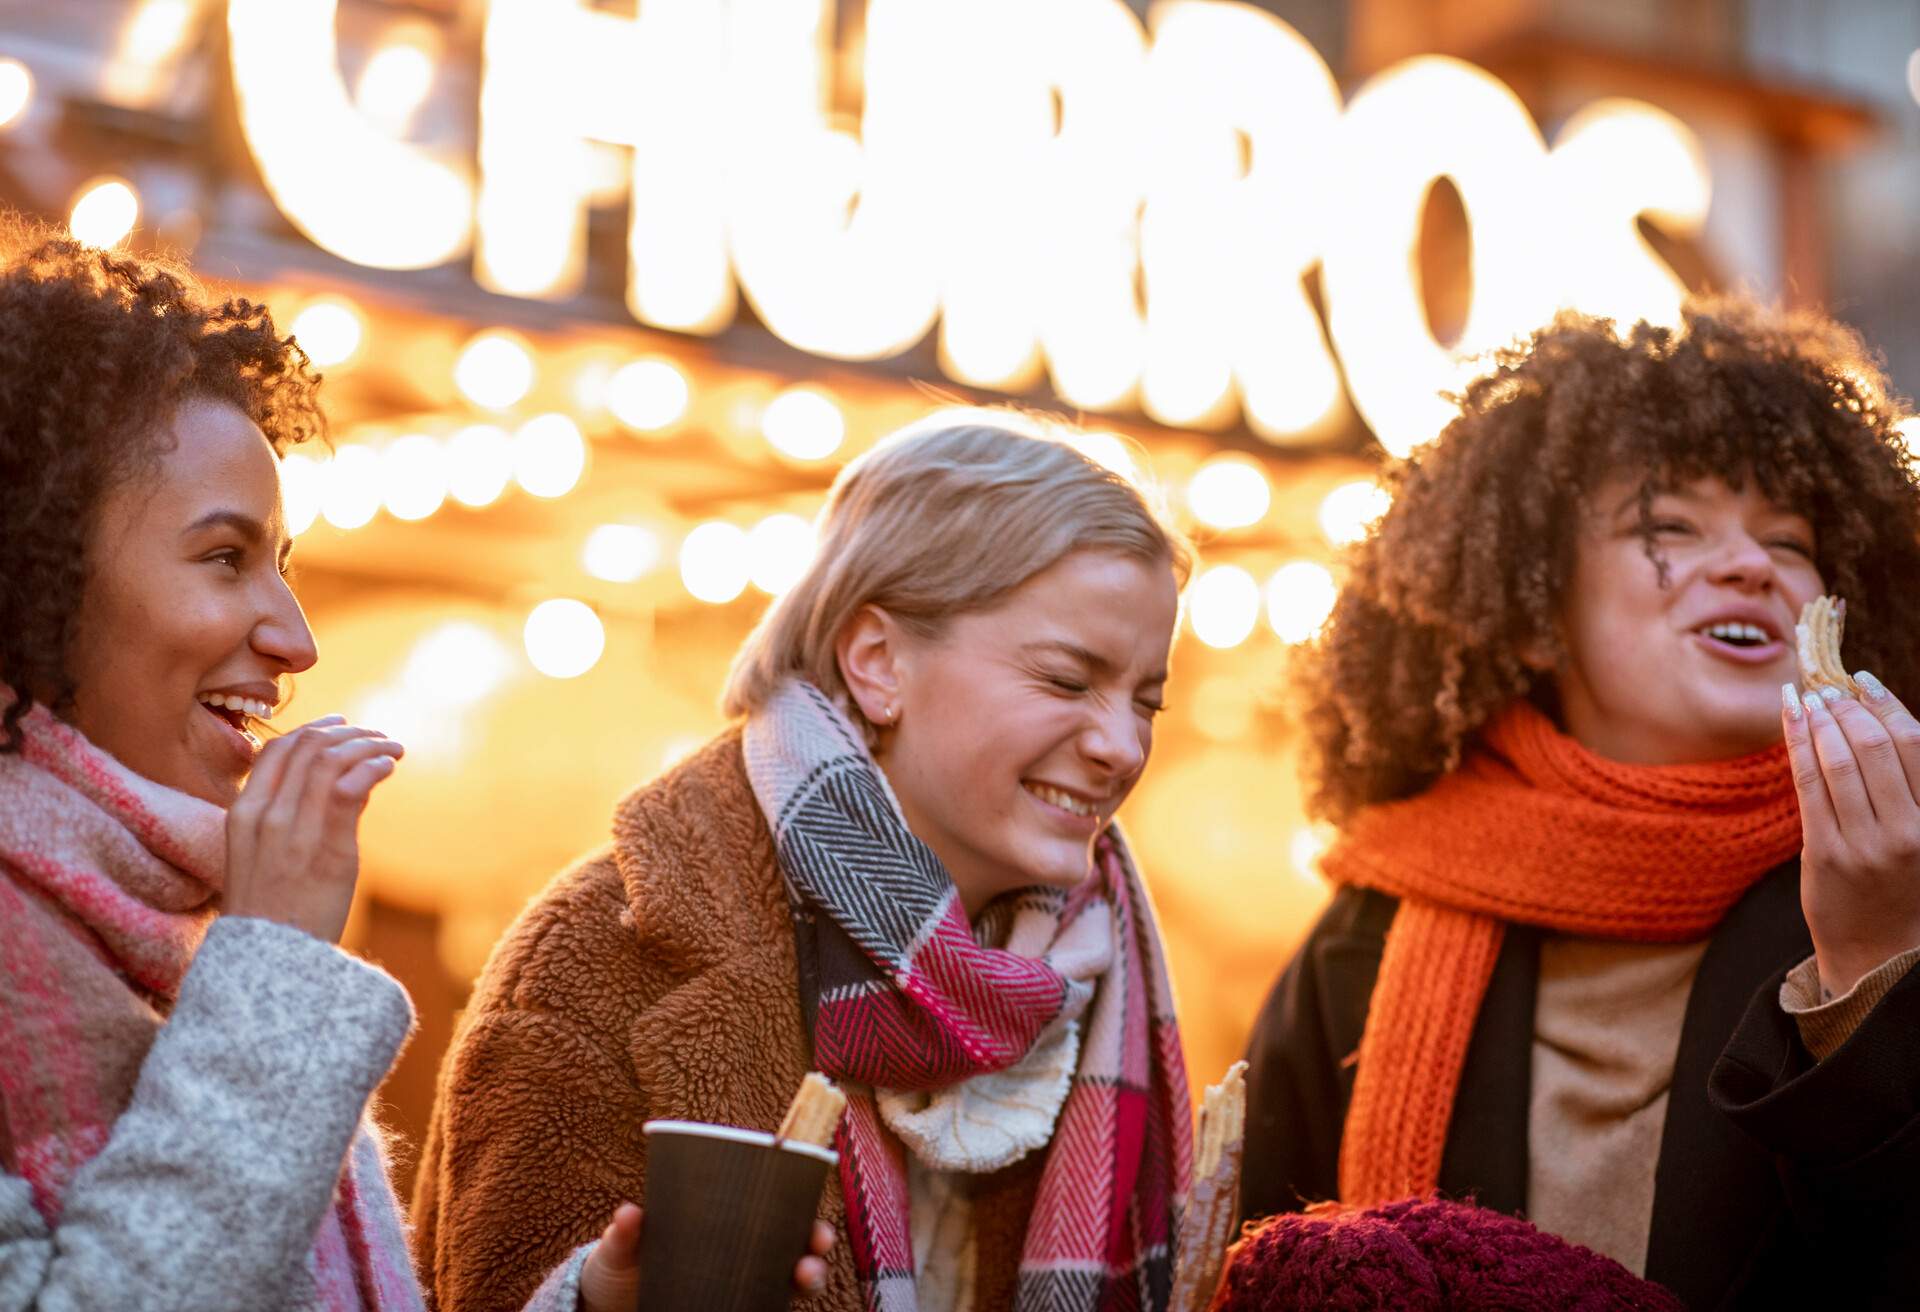 Three women in winter clothes laughing while eating churros.